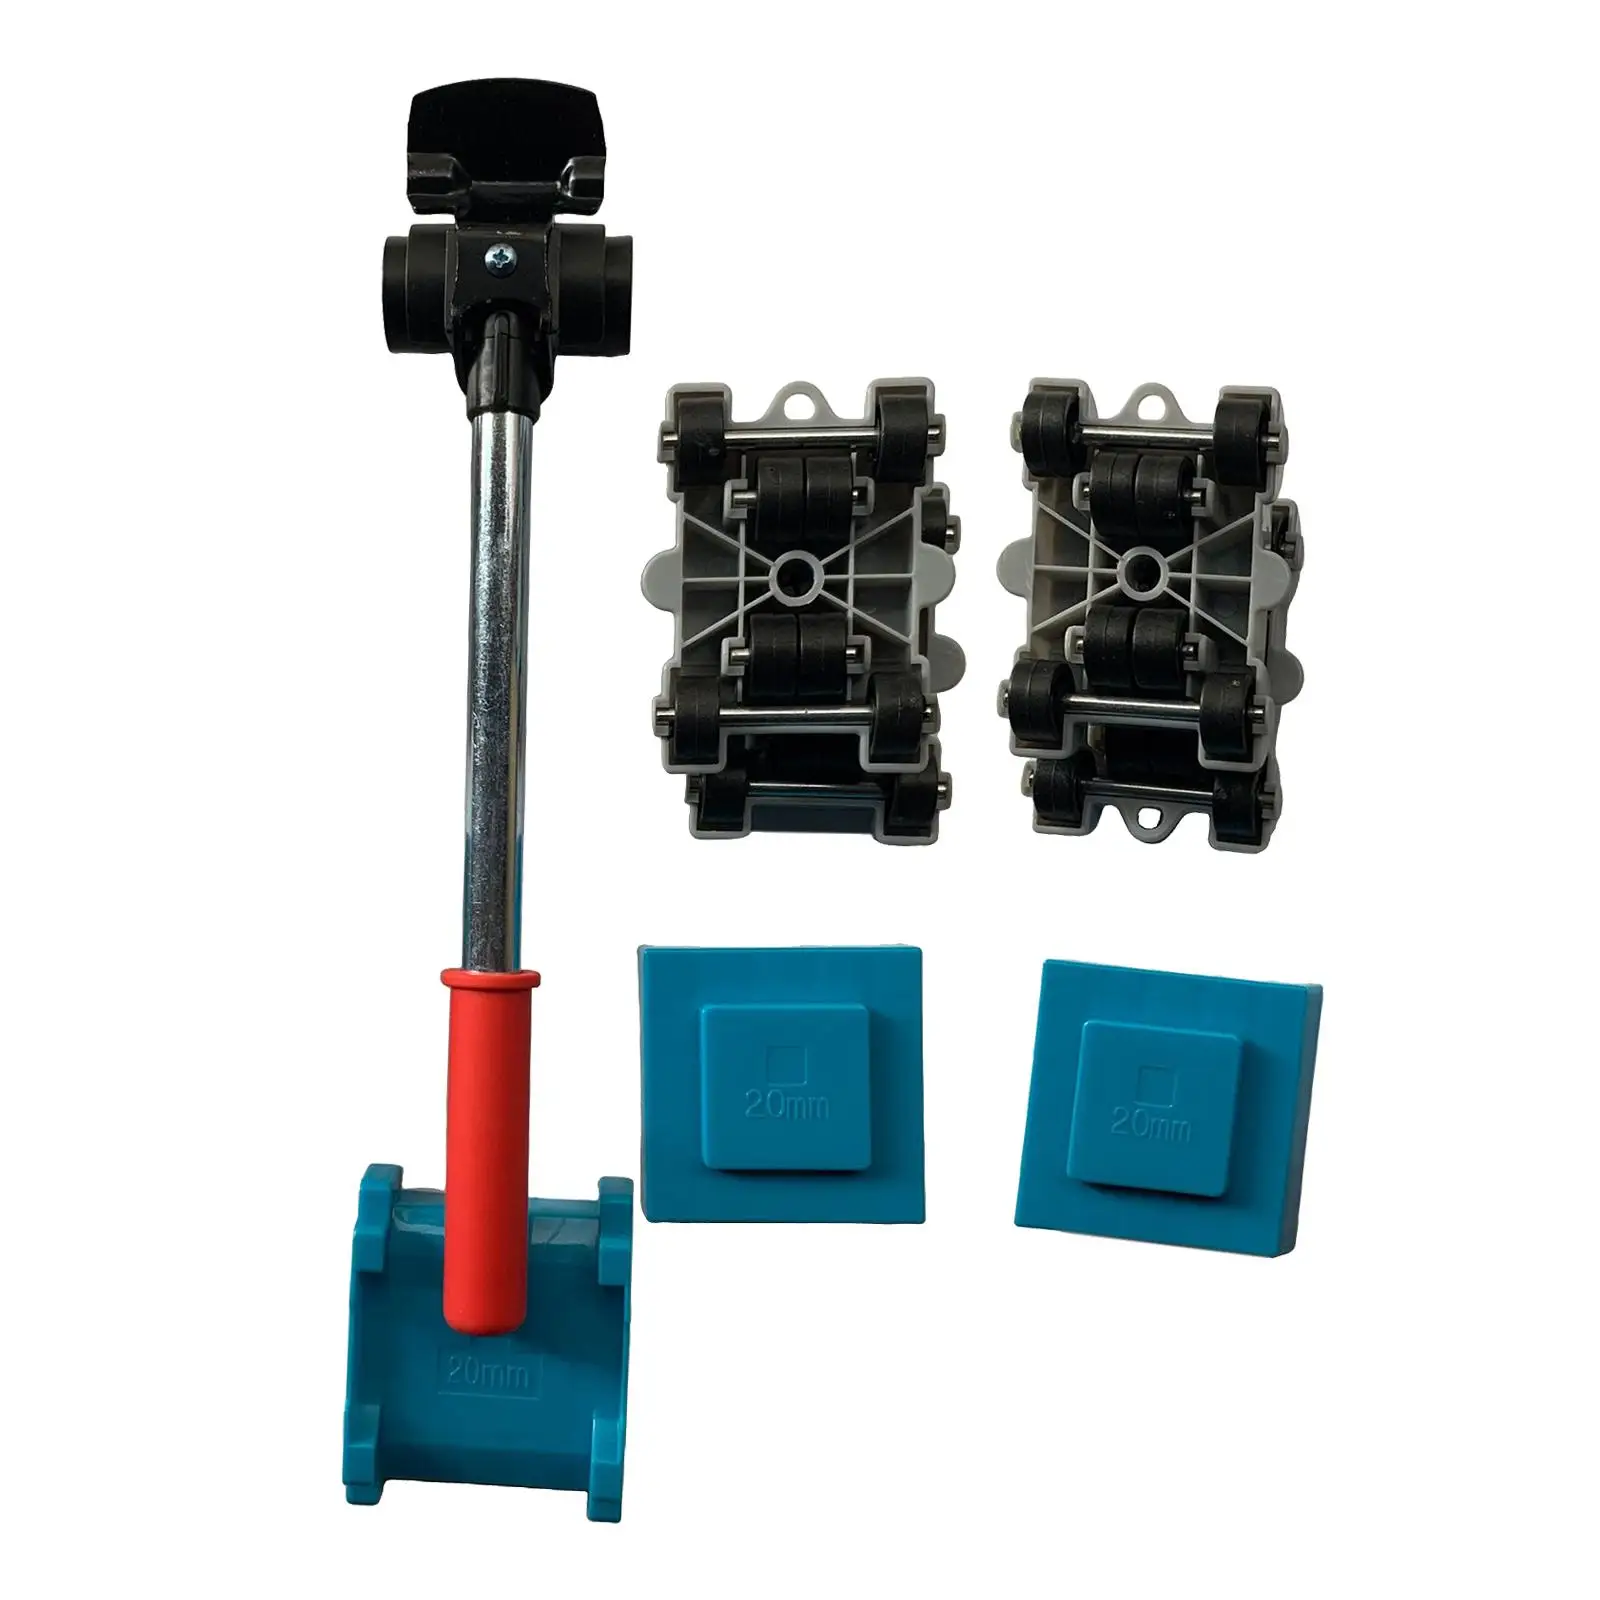 Convenient Furniture Lifter Roller tools Multifunctional Moving and Lifting System Heavy Duty for Refrigerators Wardrobes